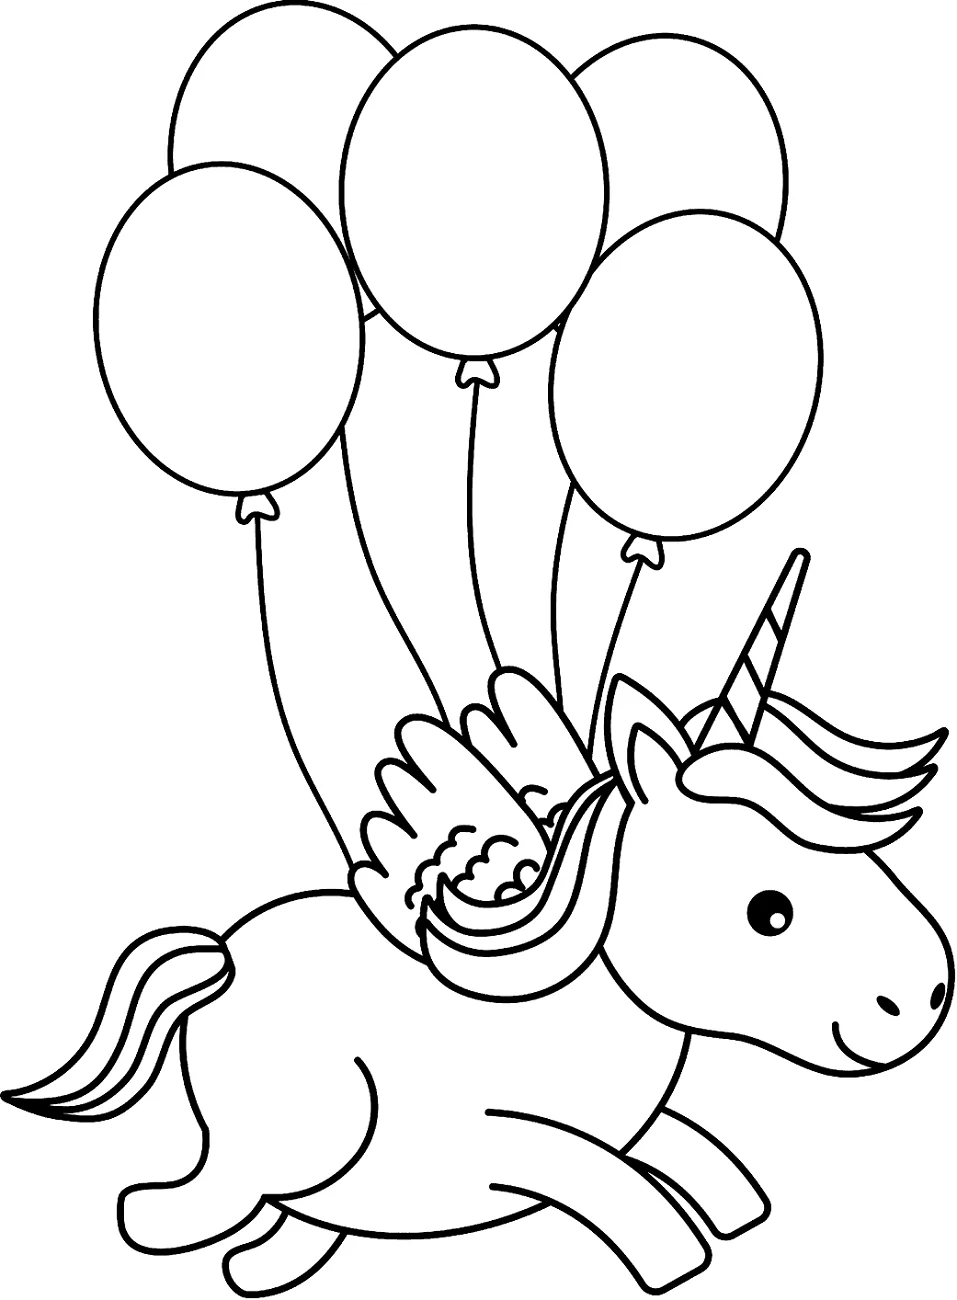 Little Unicorn With Balloons Coloring Page - Free Printable Coloring ...